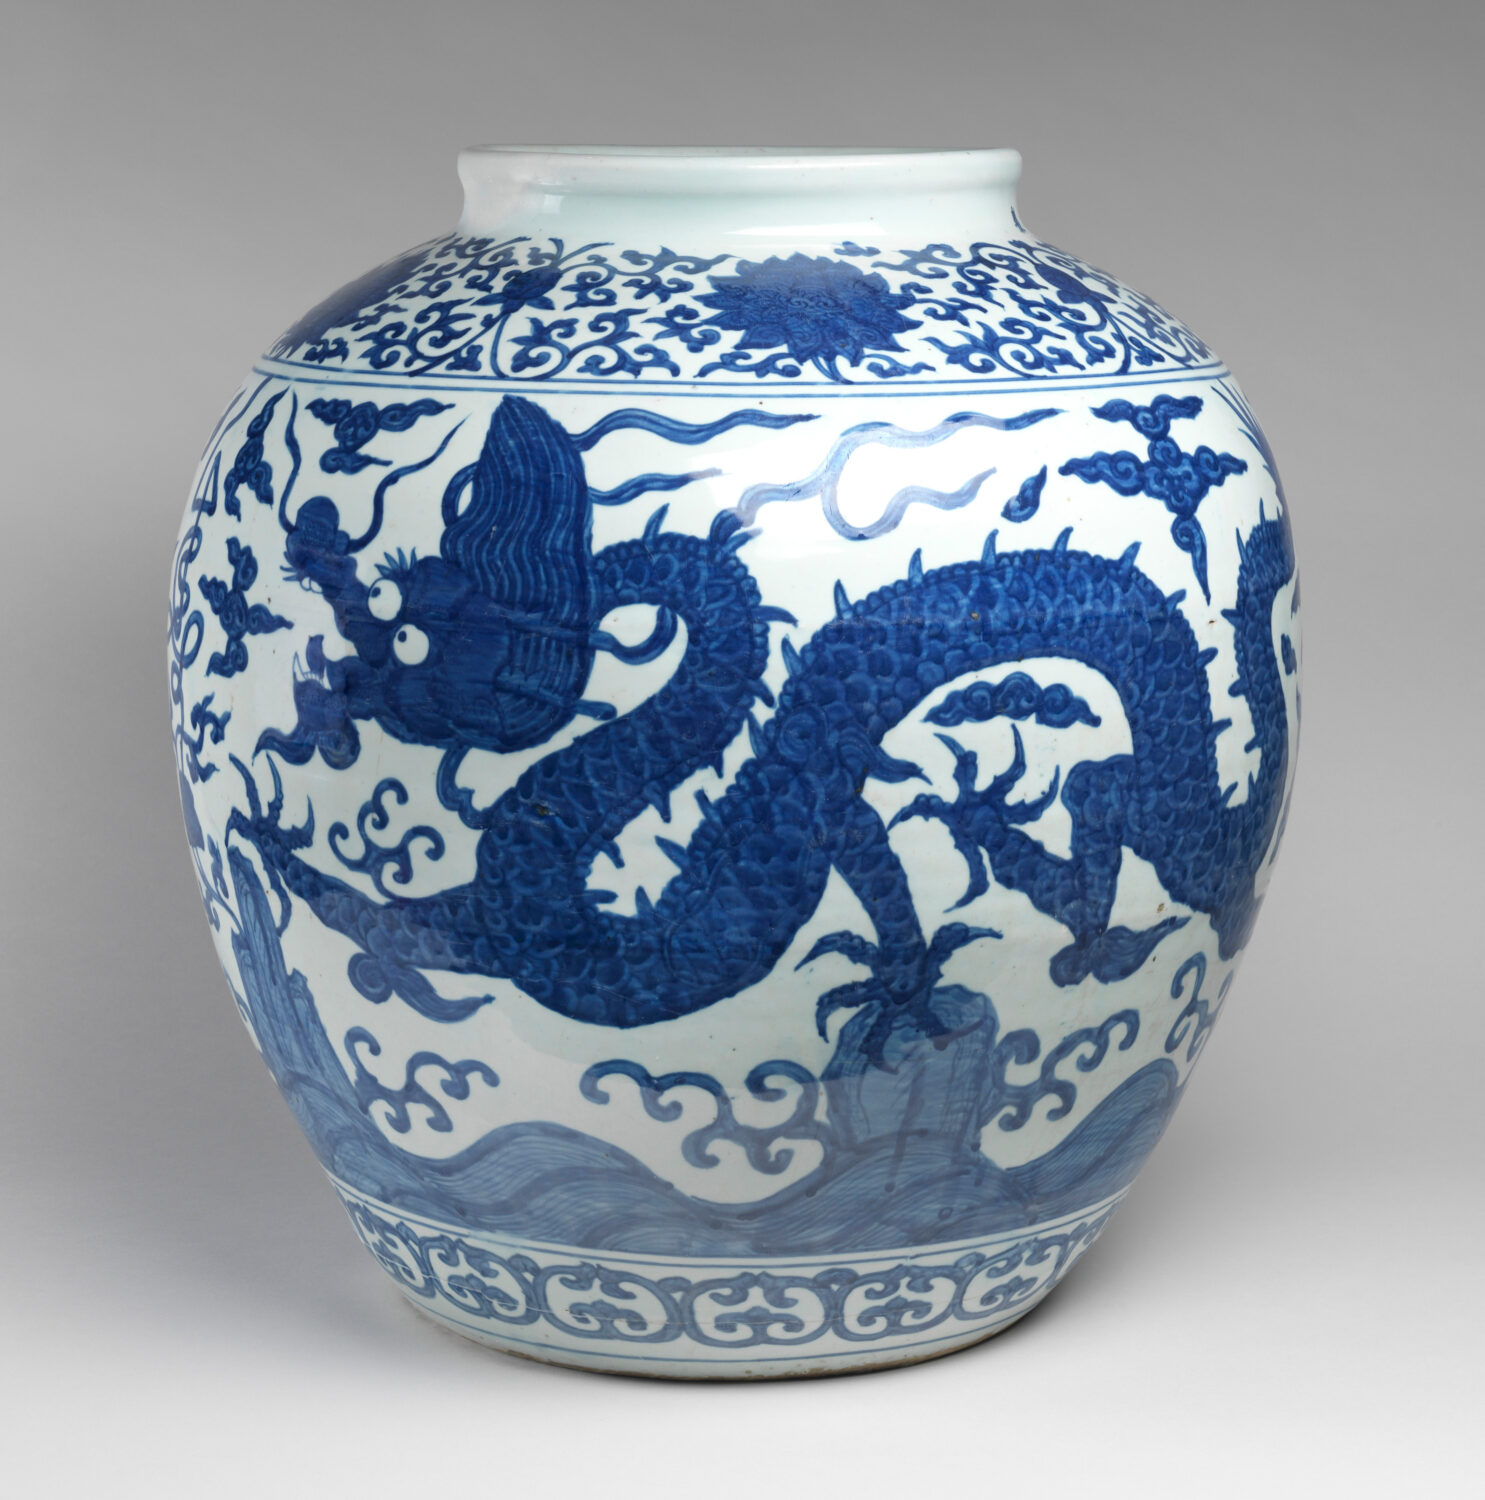 A large porcelain Chinese jar with blue decorations showing a dragon with a long body in the sky.